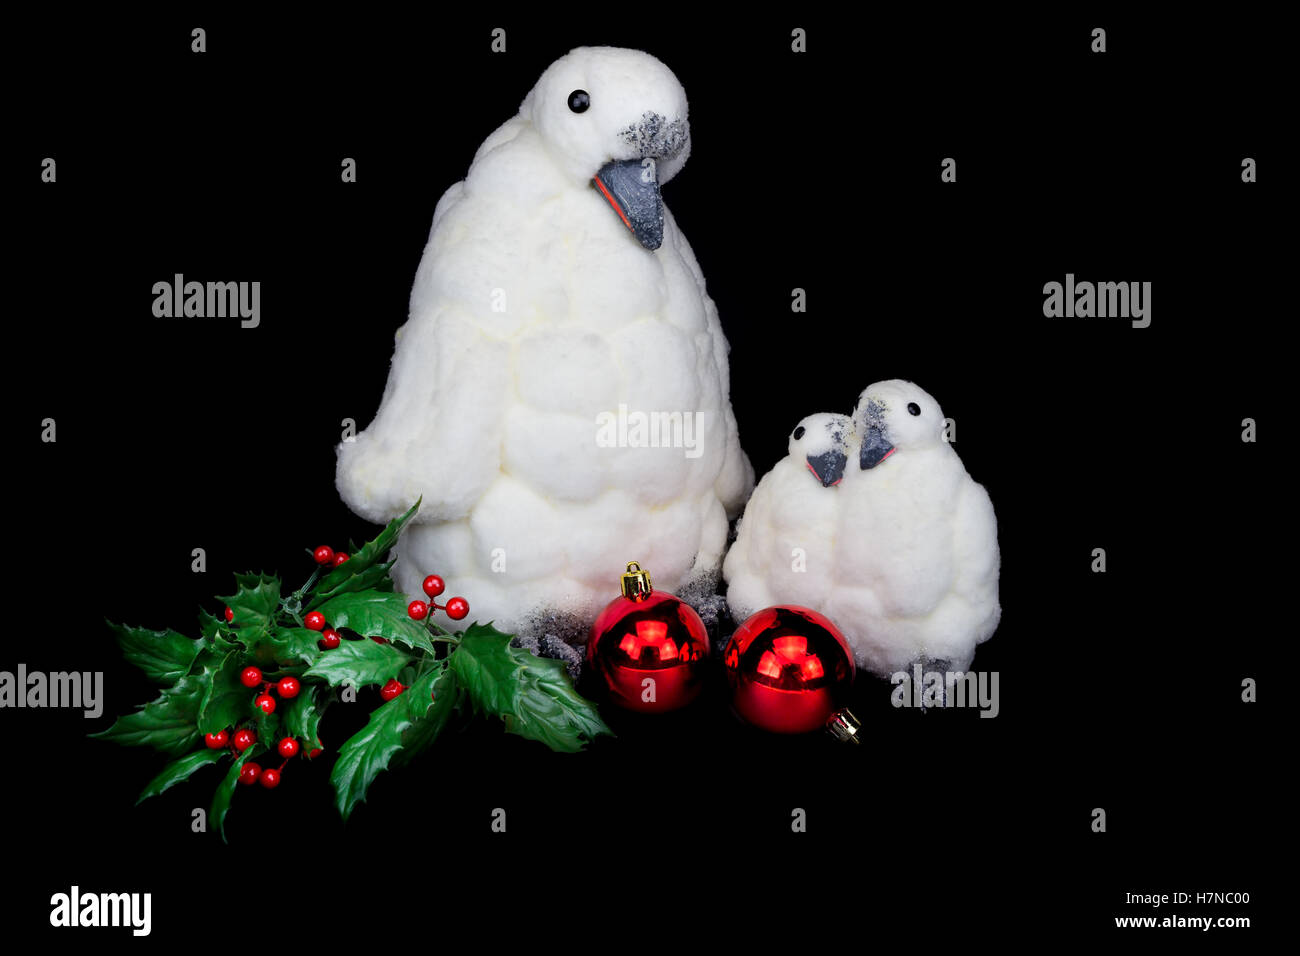 Penguin figures as family with baubles and holly berries on black background Stock Photo